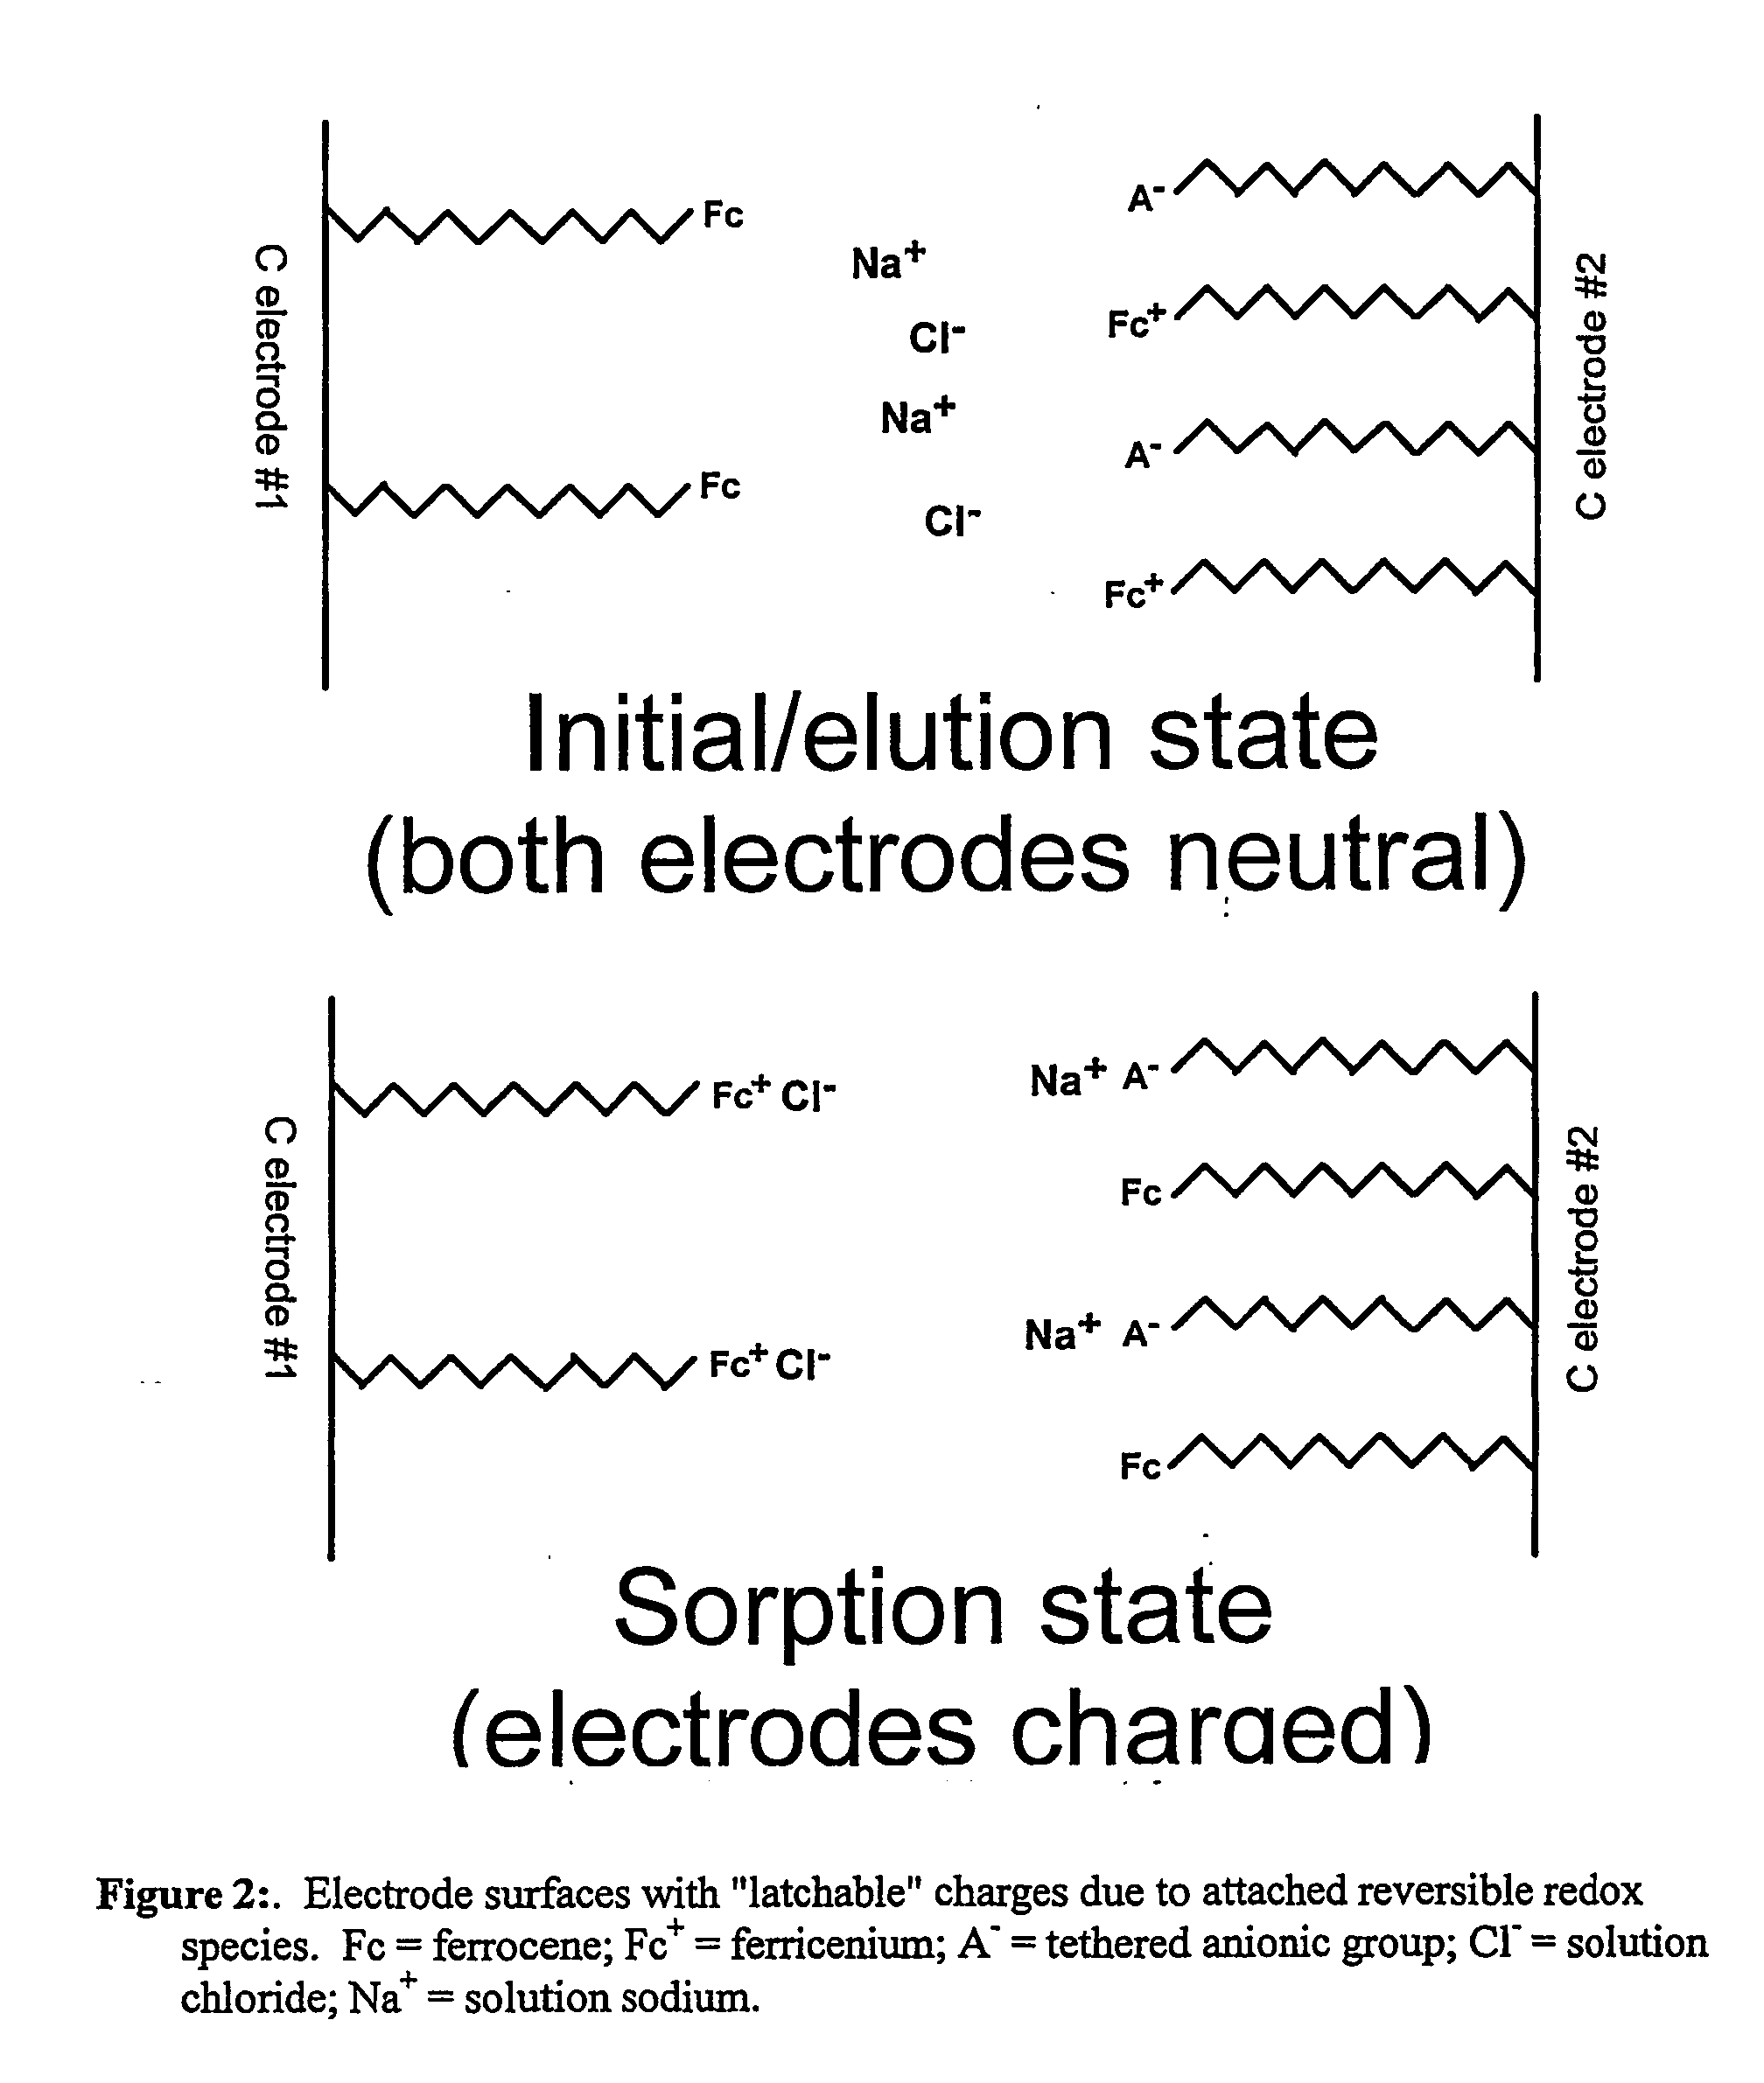 Redox-switchable materials